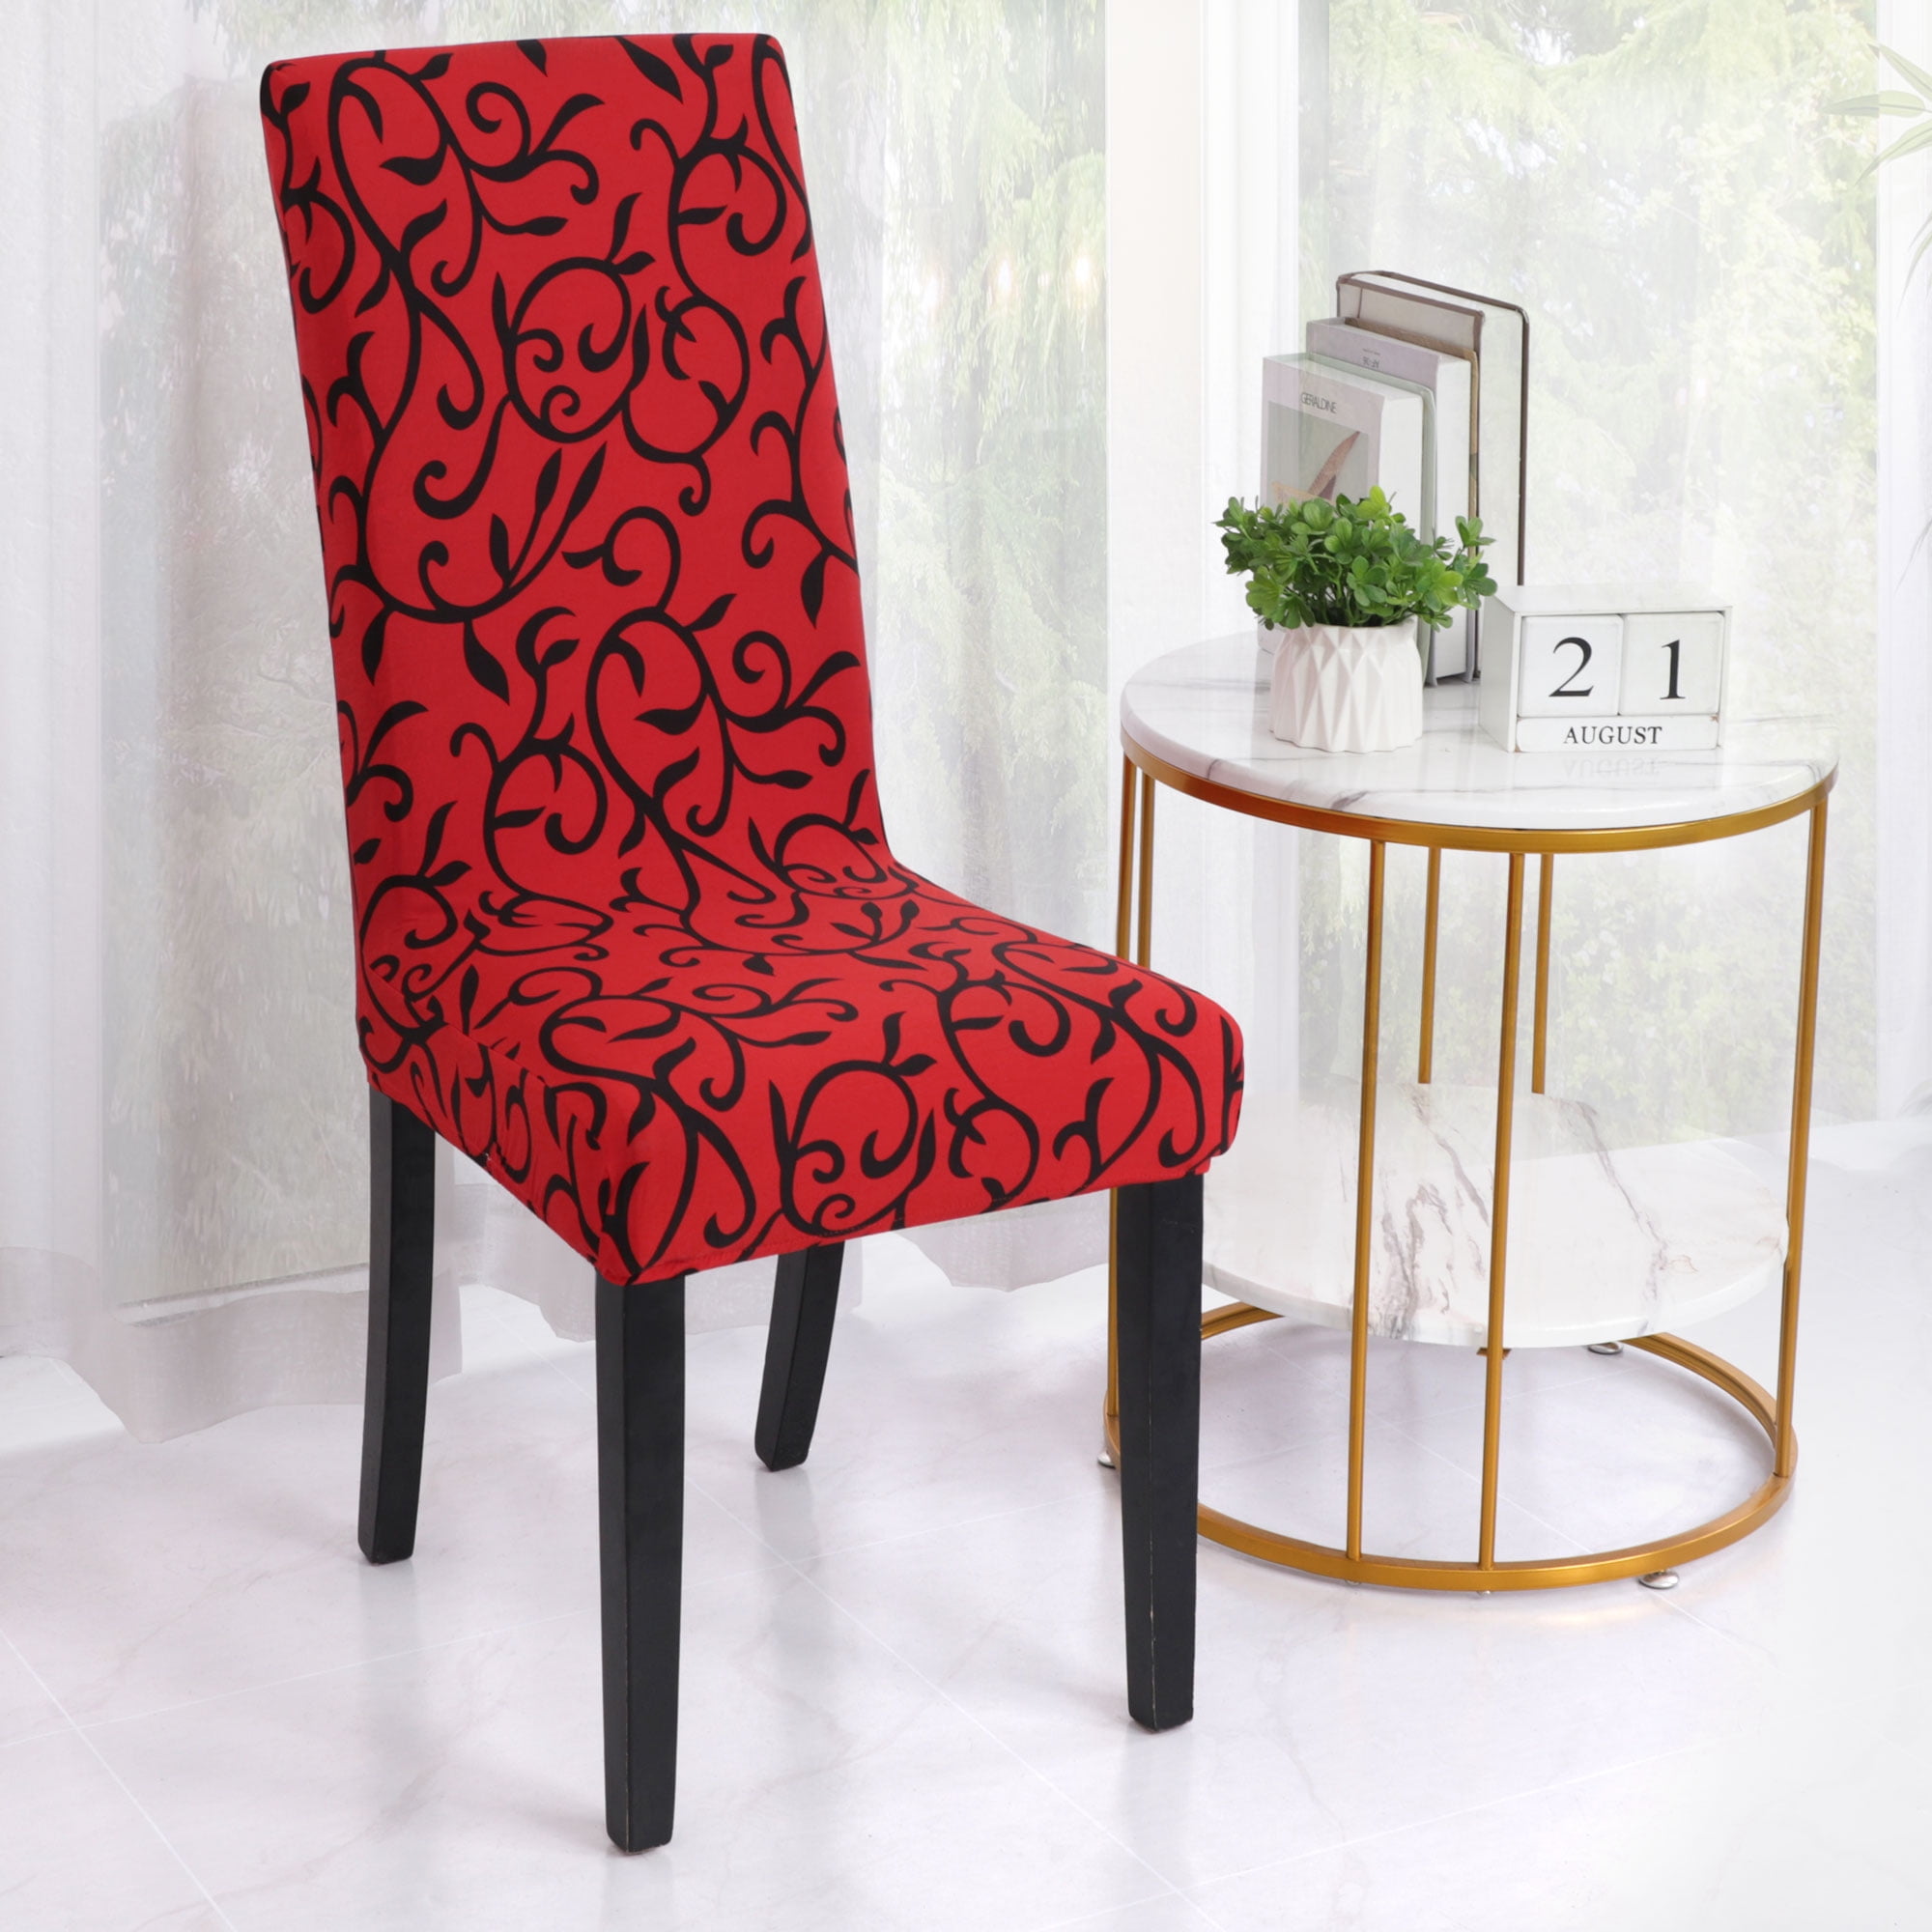 Removable Chair Cover Stretch Slipcovers Dining Room Stool Seat Printed Cover PL 